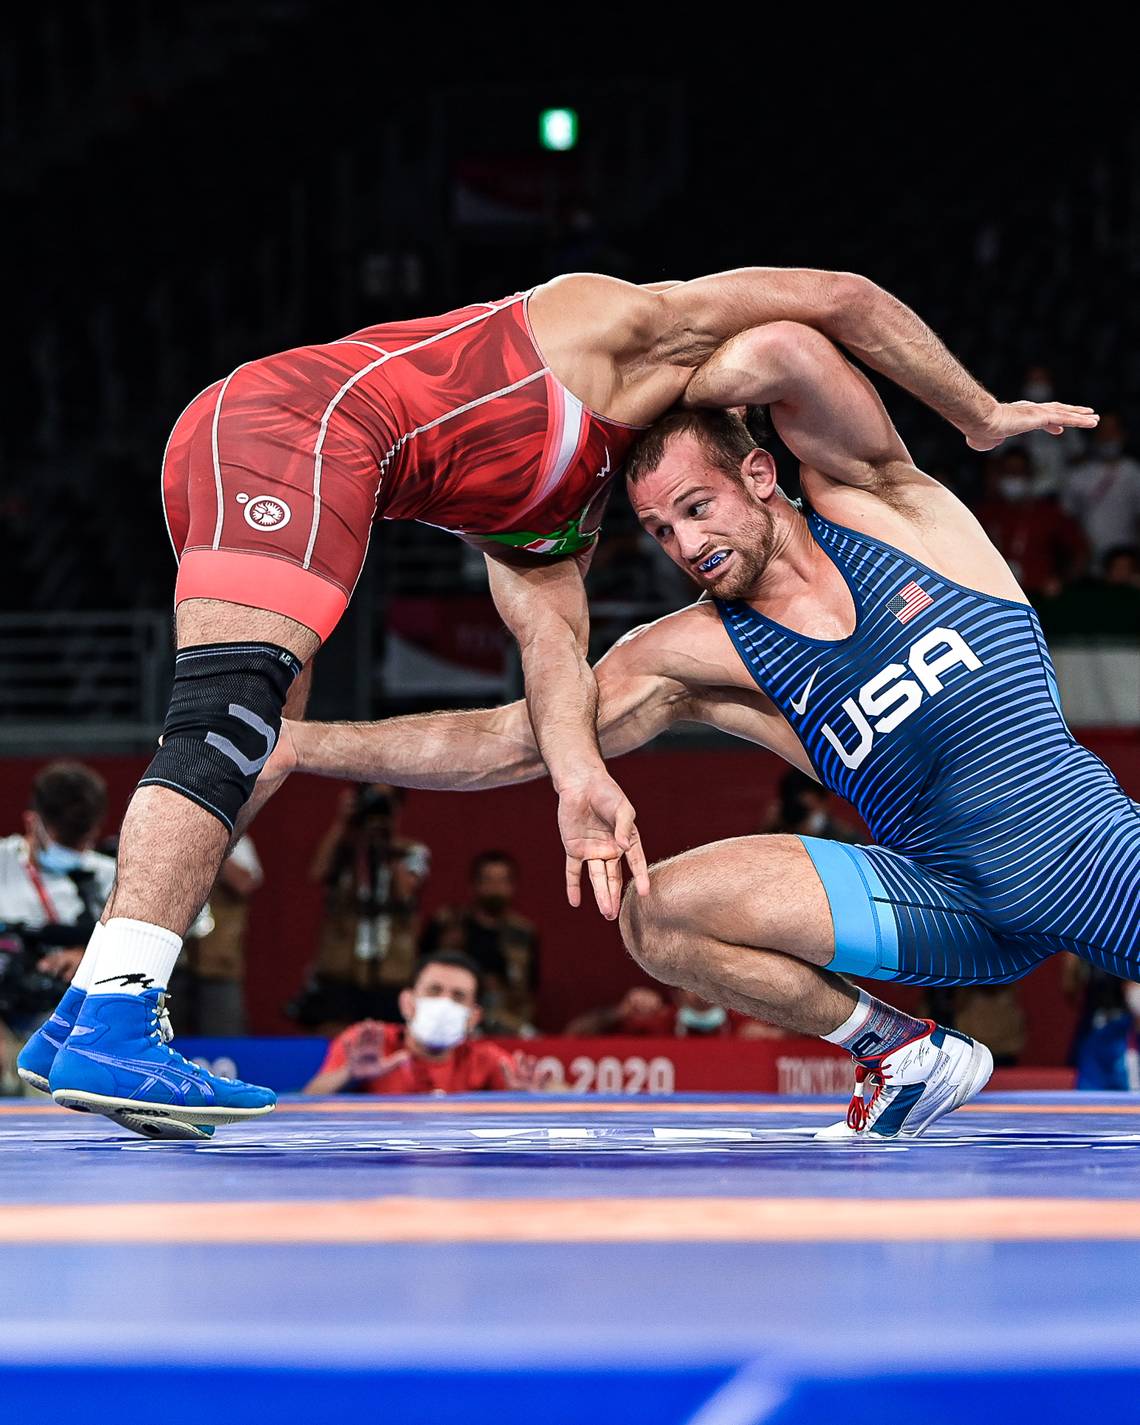 6 Nittany Lion Wrestling Club members earn spots on United States World Team